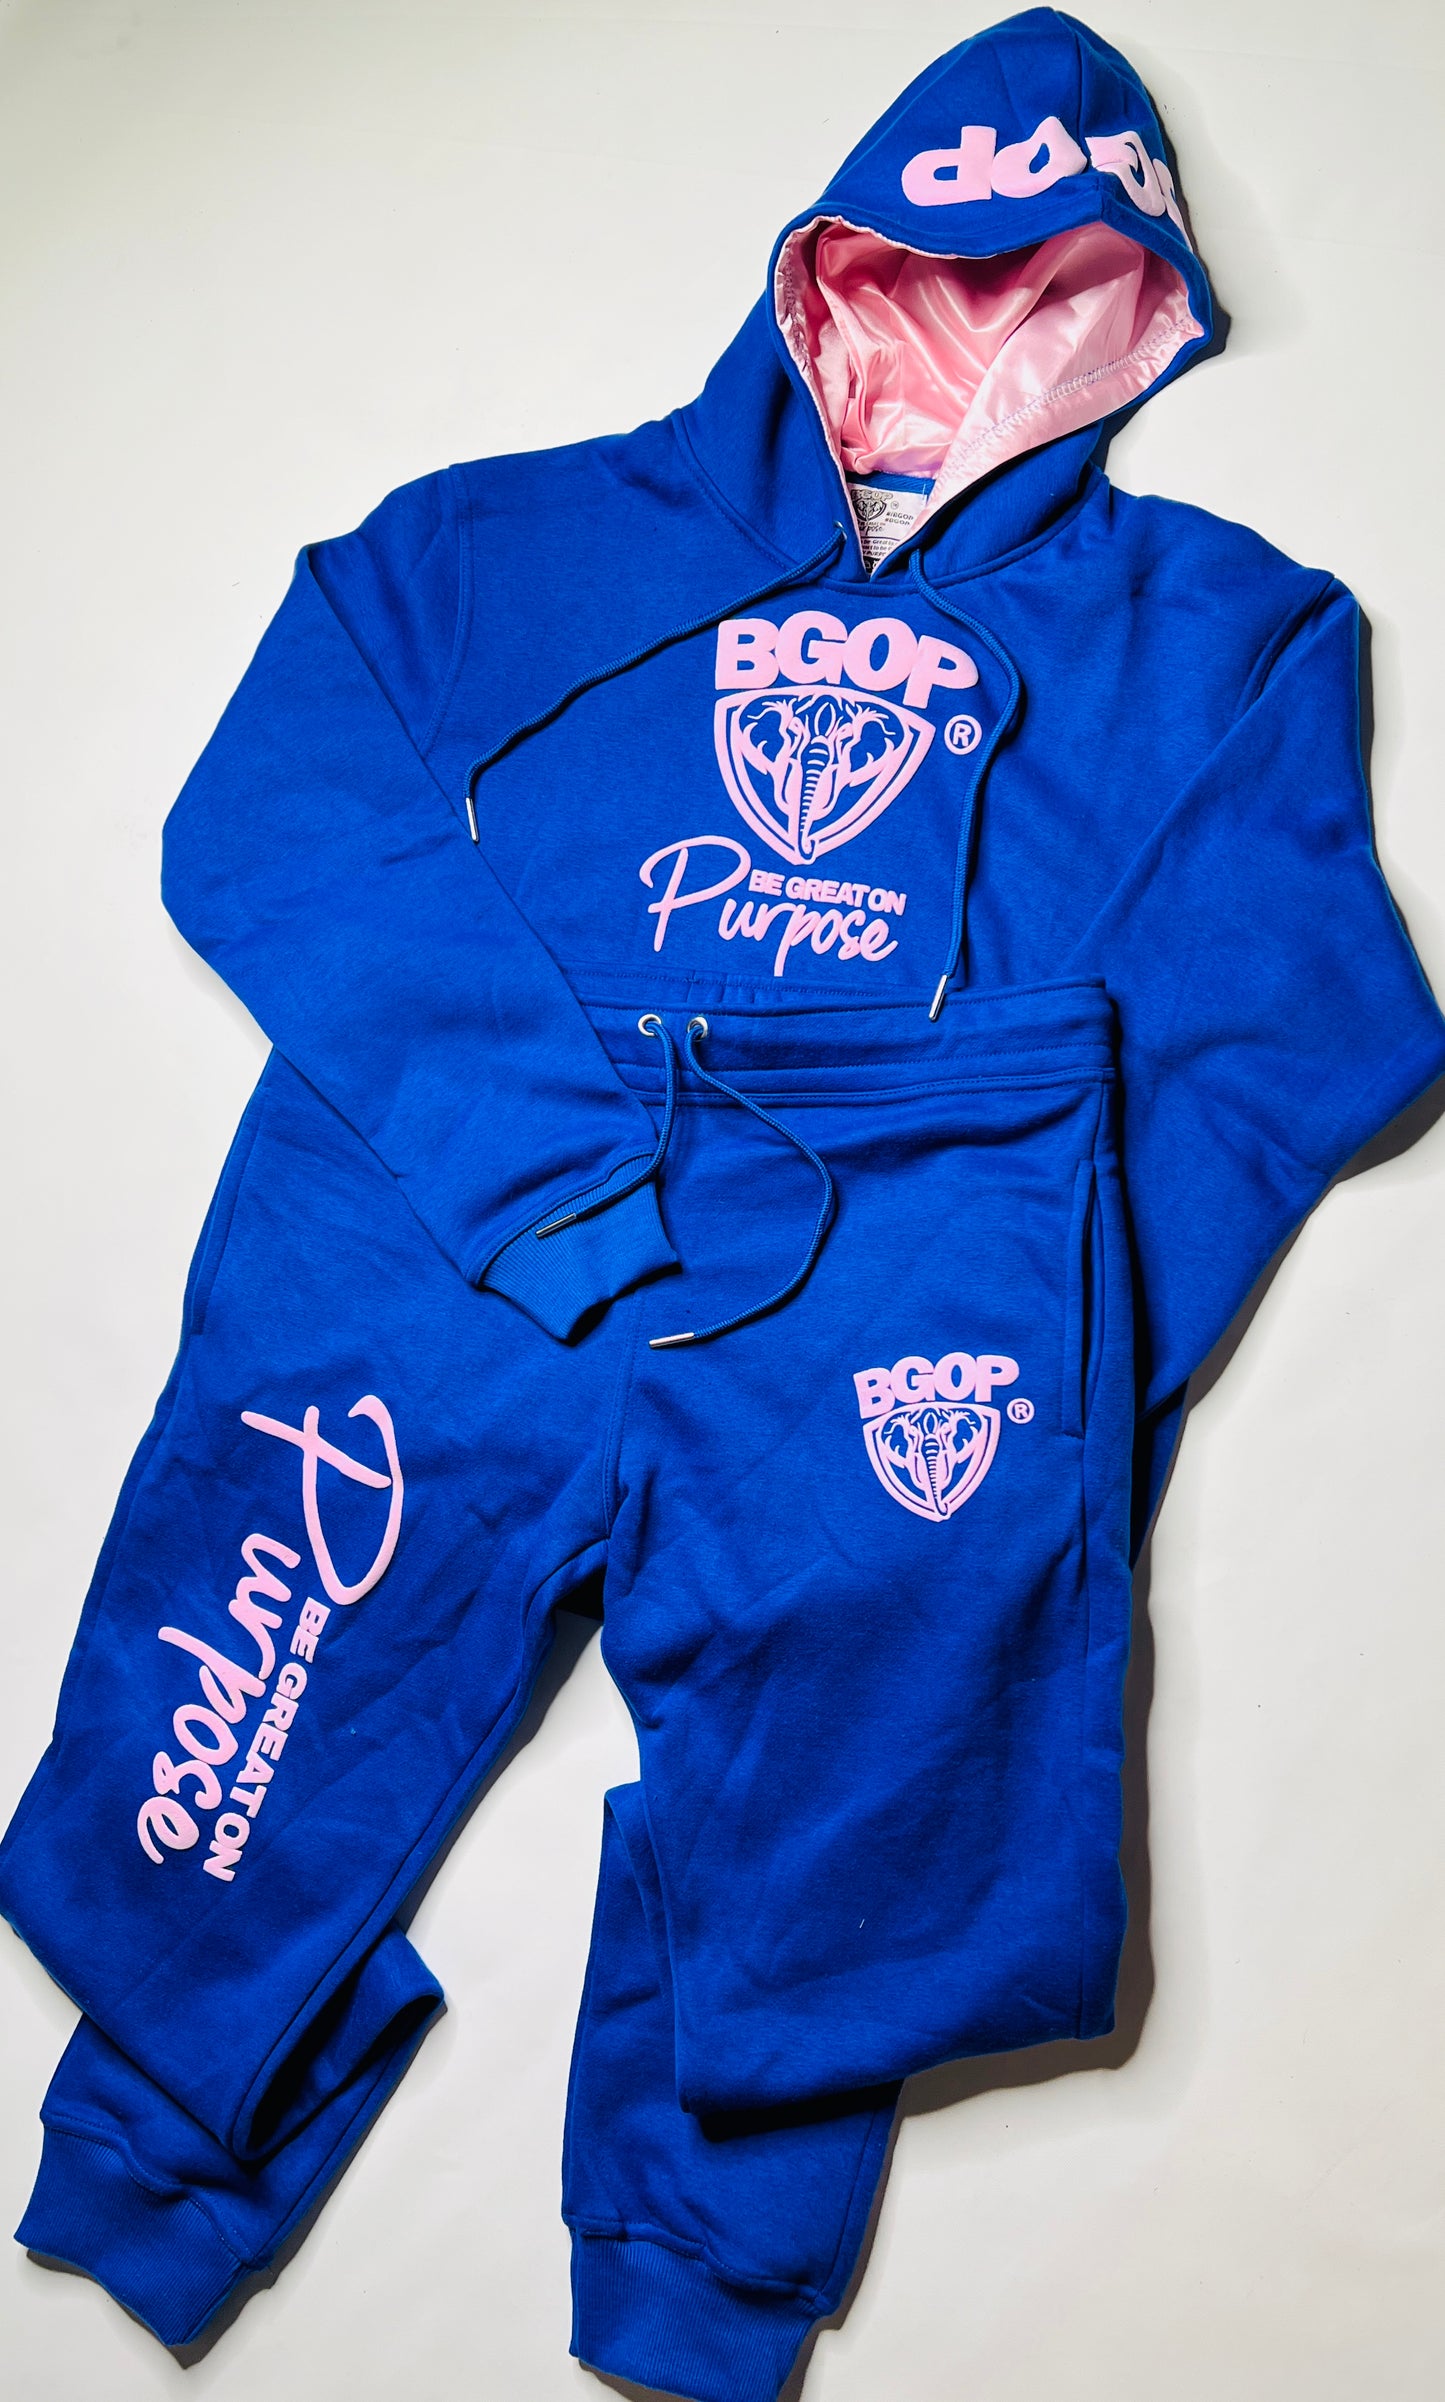 Be Great On Purpose Jogger Hoodie Set